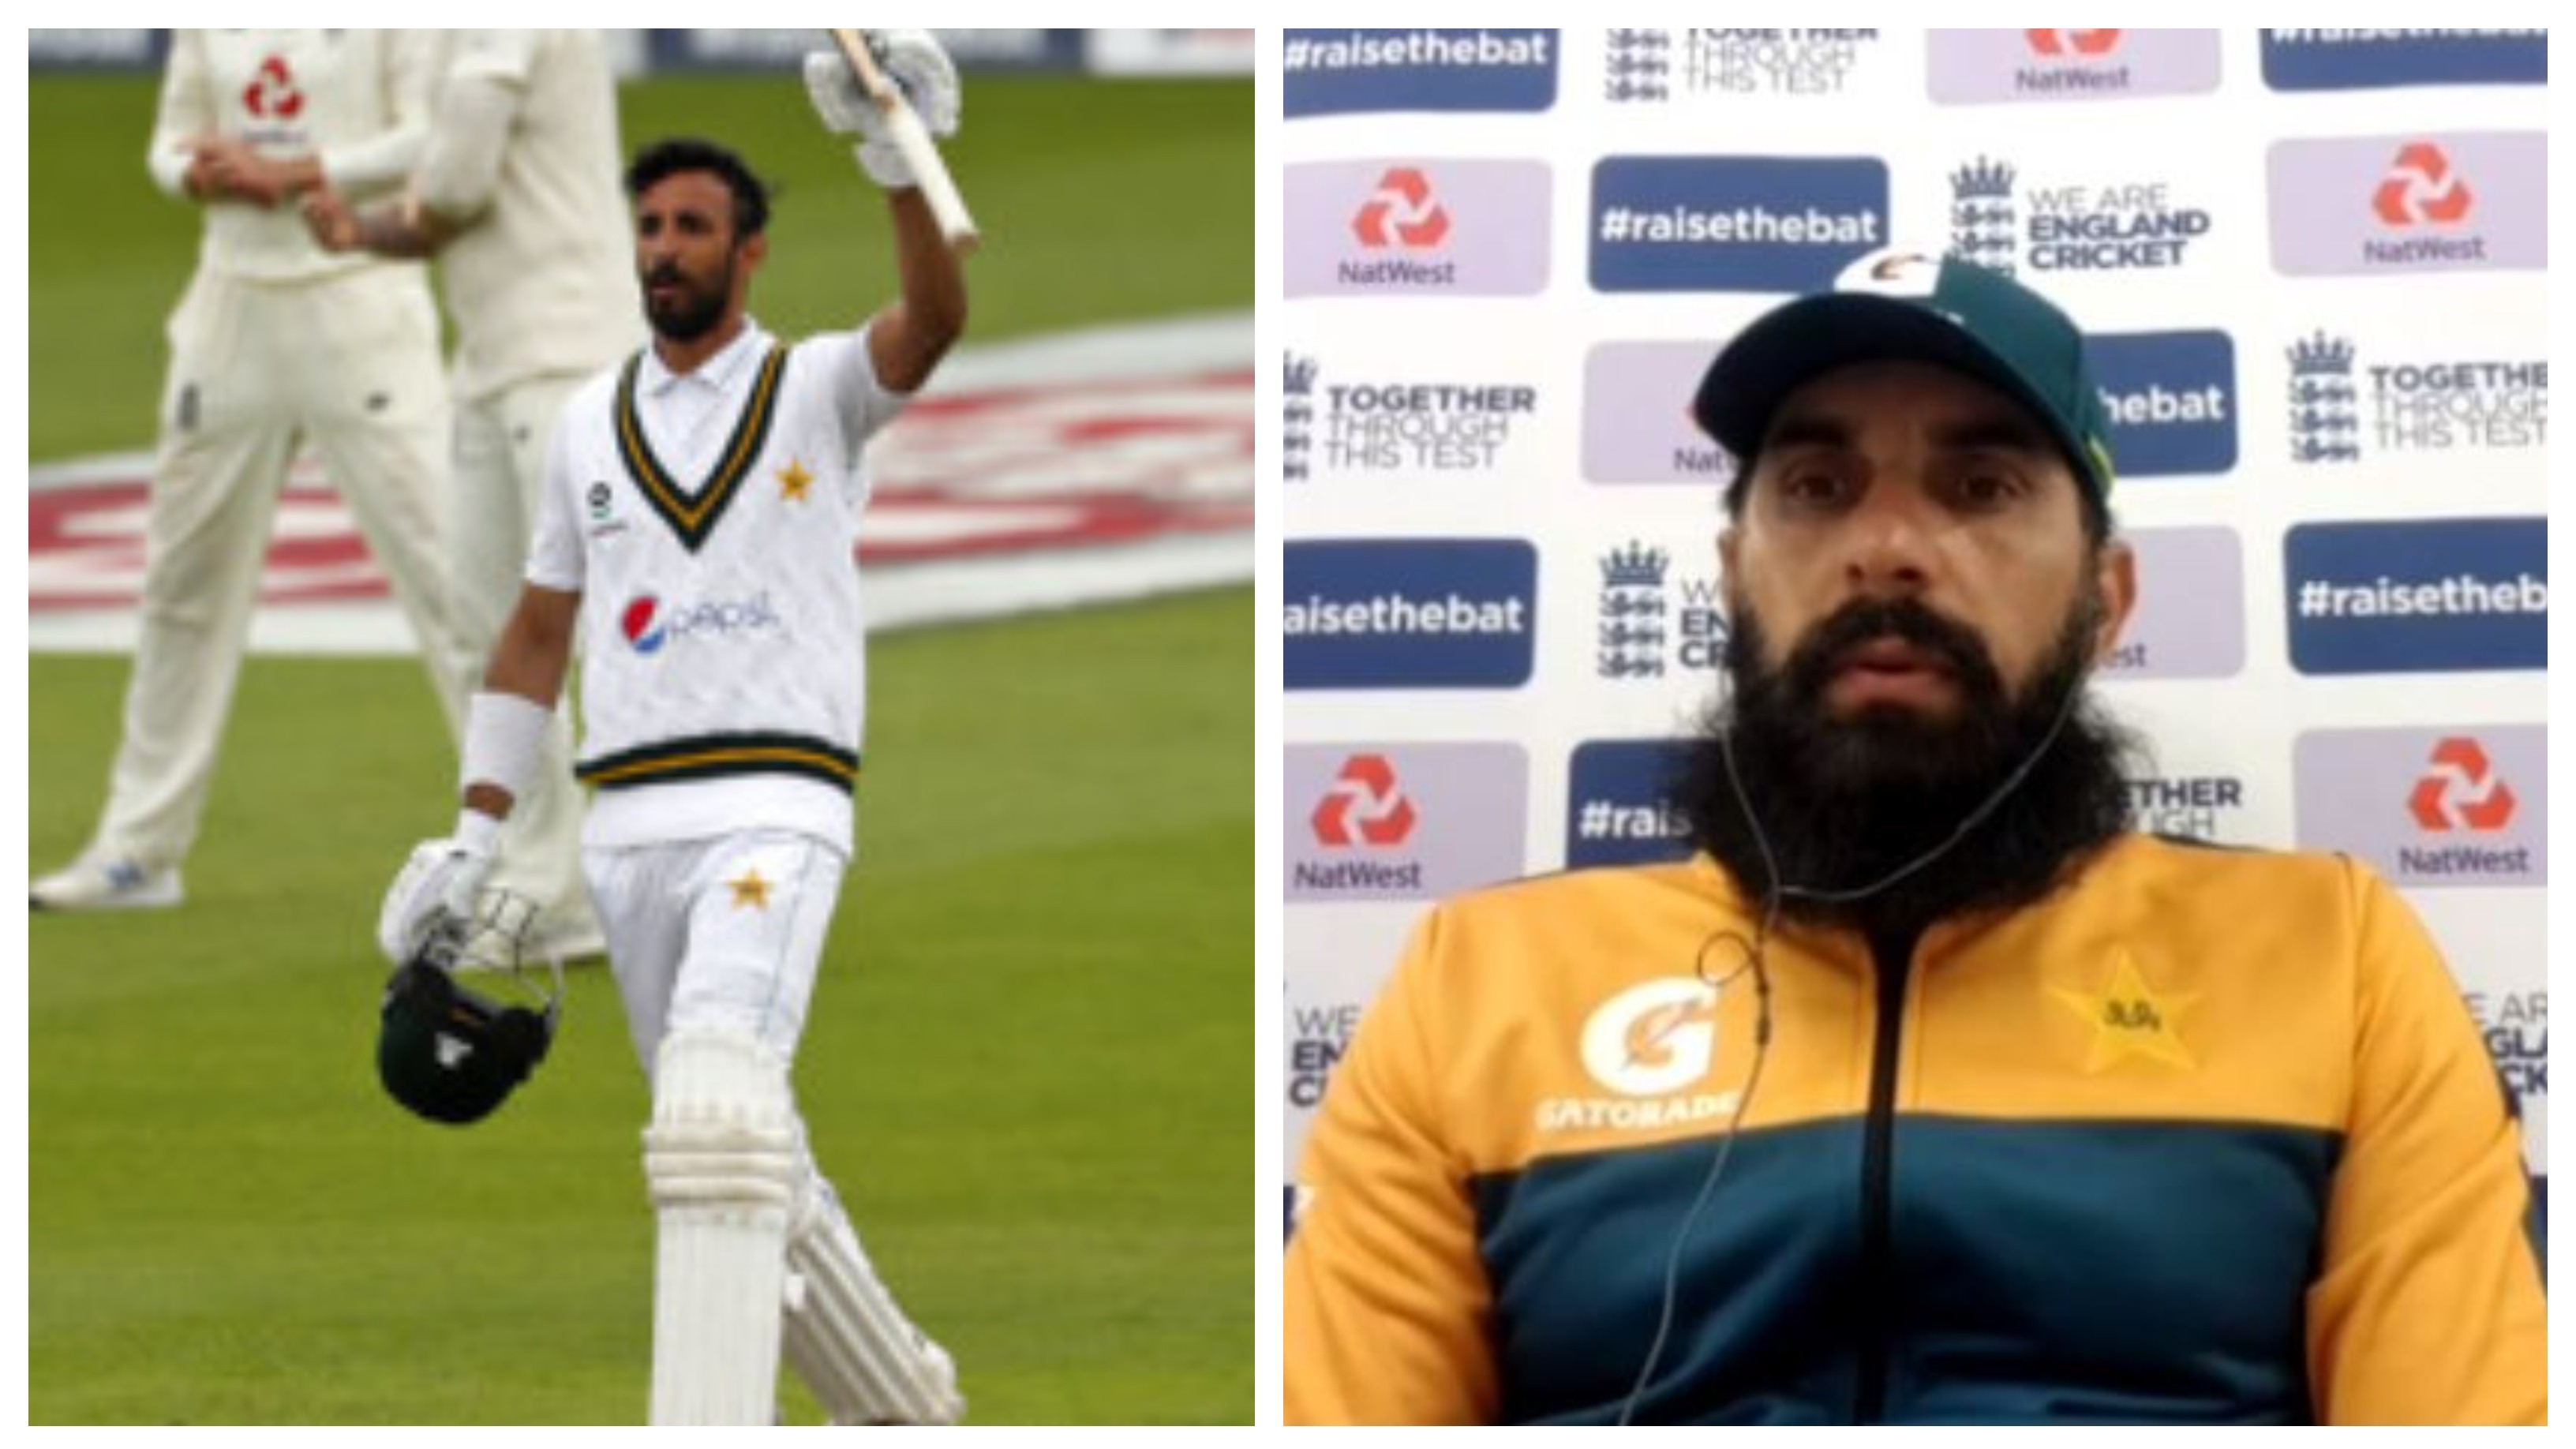 ENG v PAK 2020: Misbah-ul-Haq lauds Shan Masood after resilient ton in Manchester